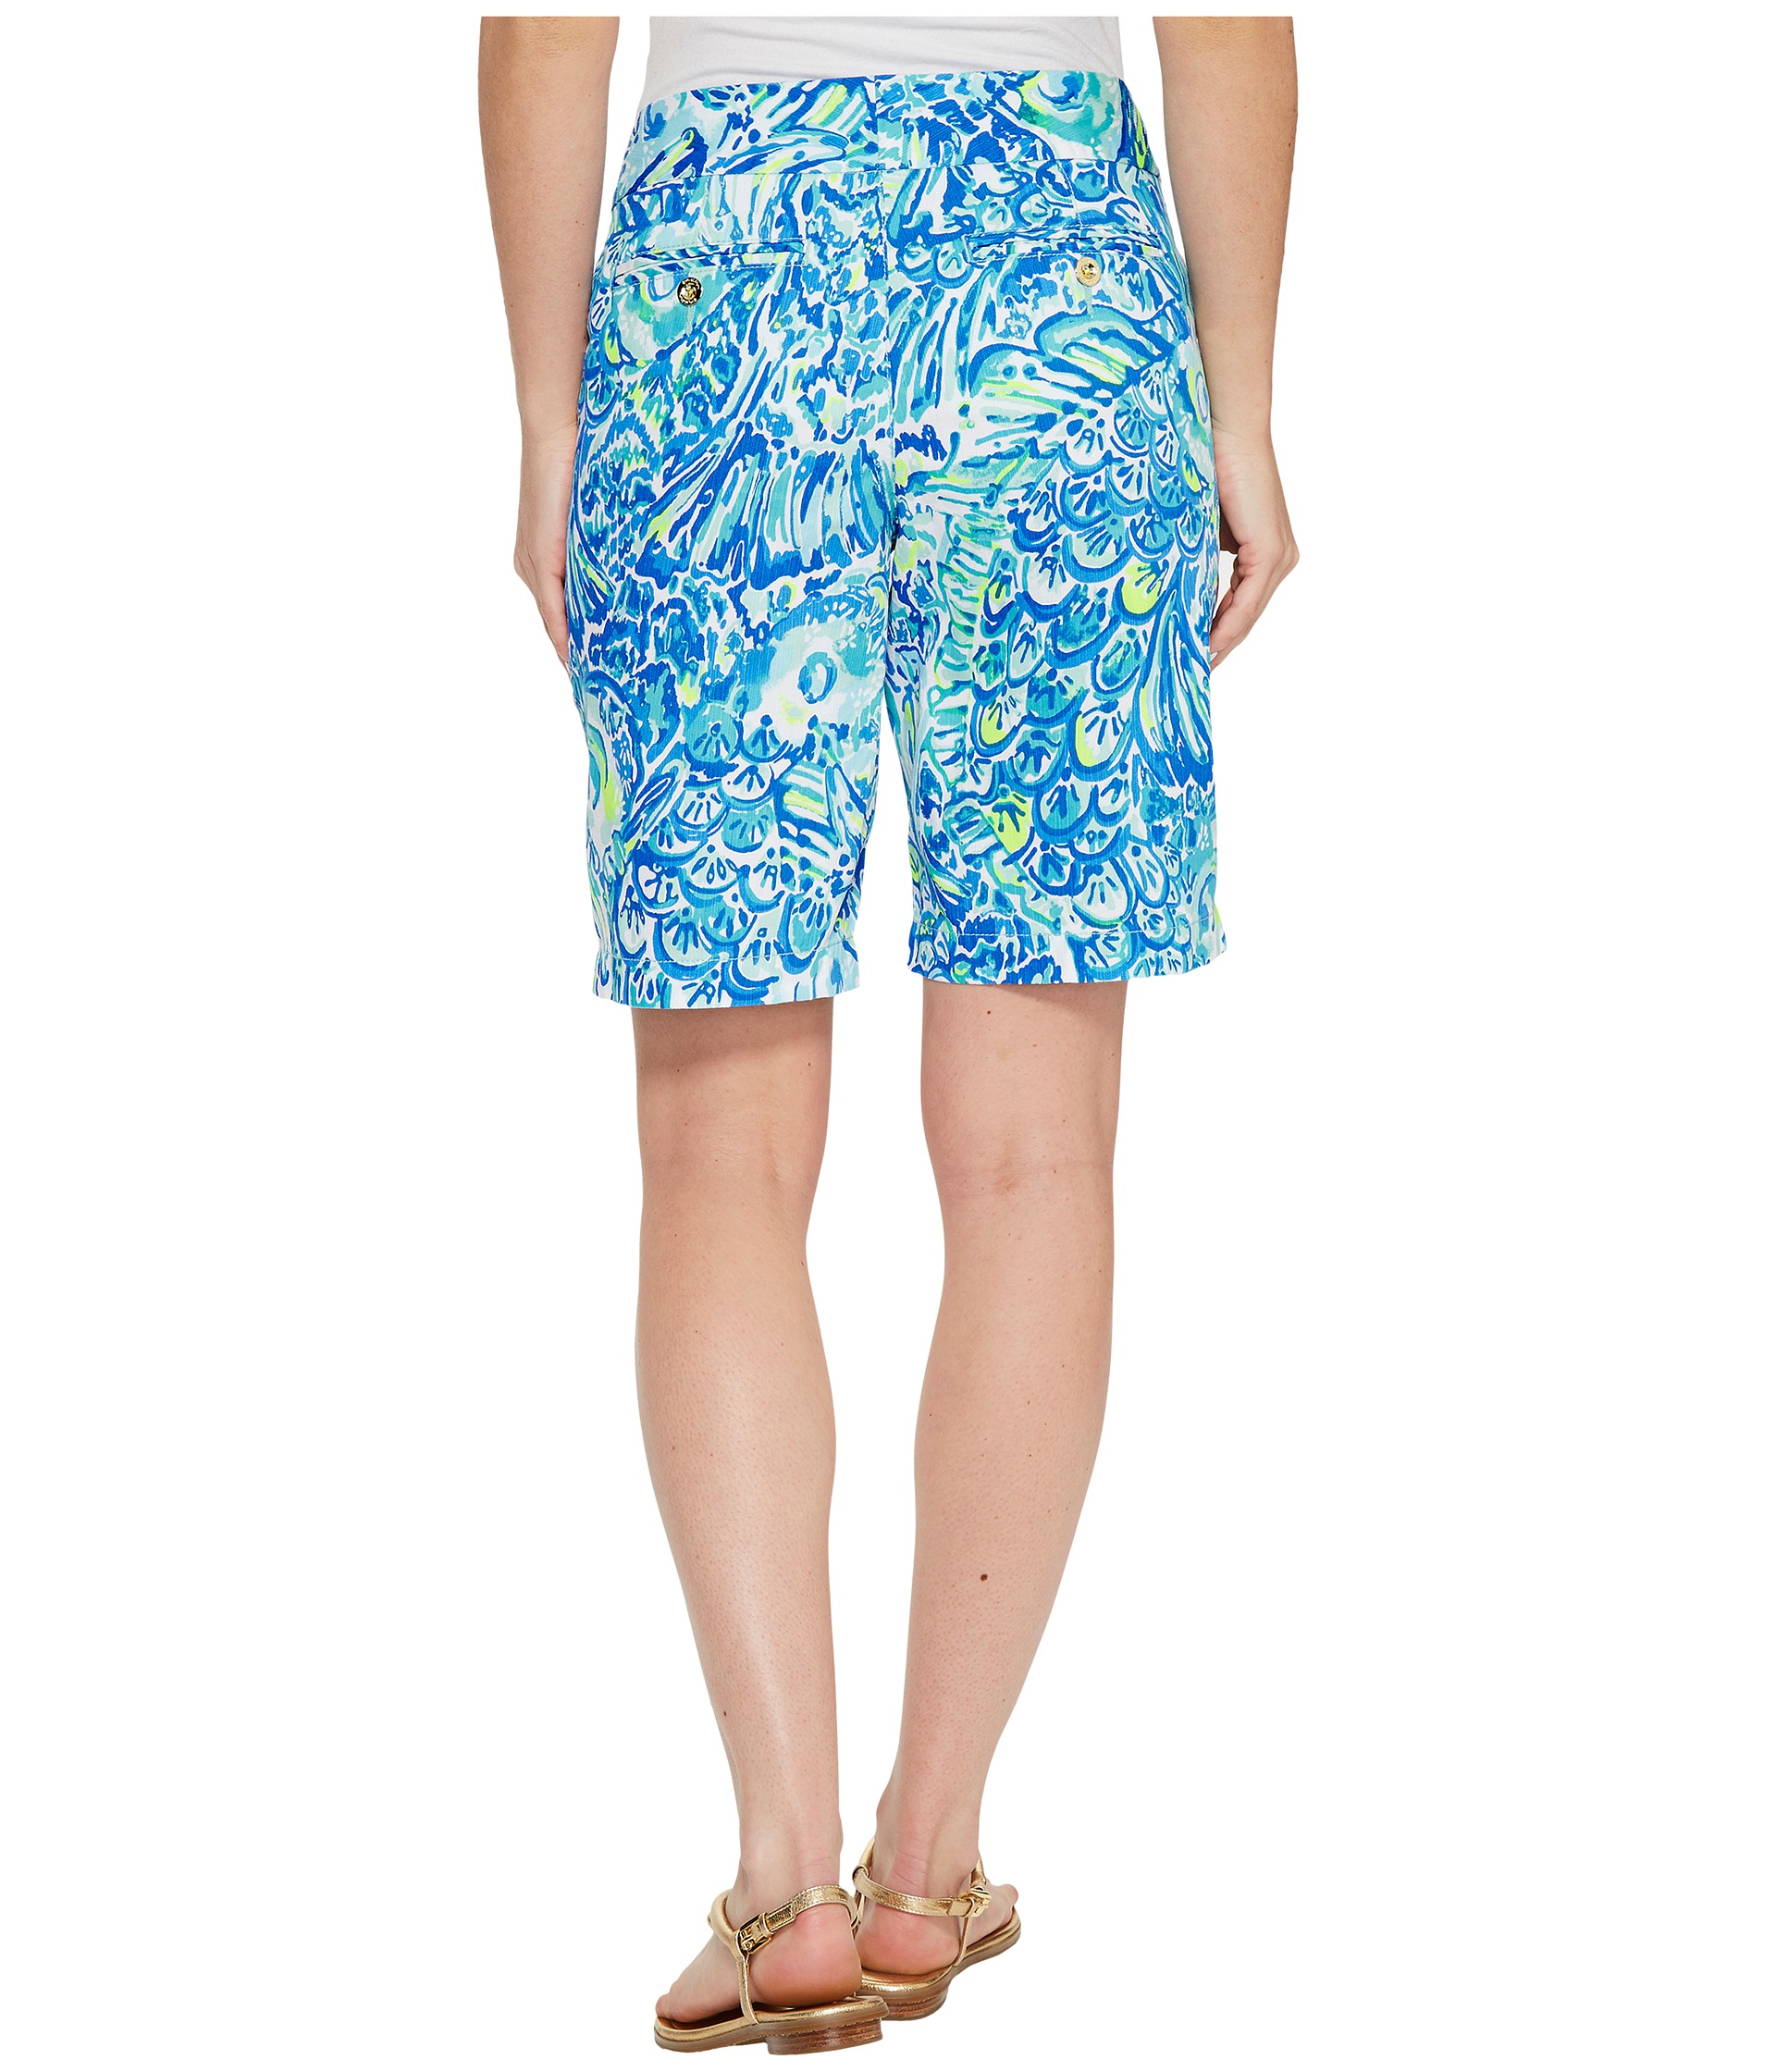 Lilly Pulitzer Chipper Shorts at Zappos.com